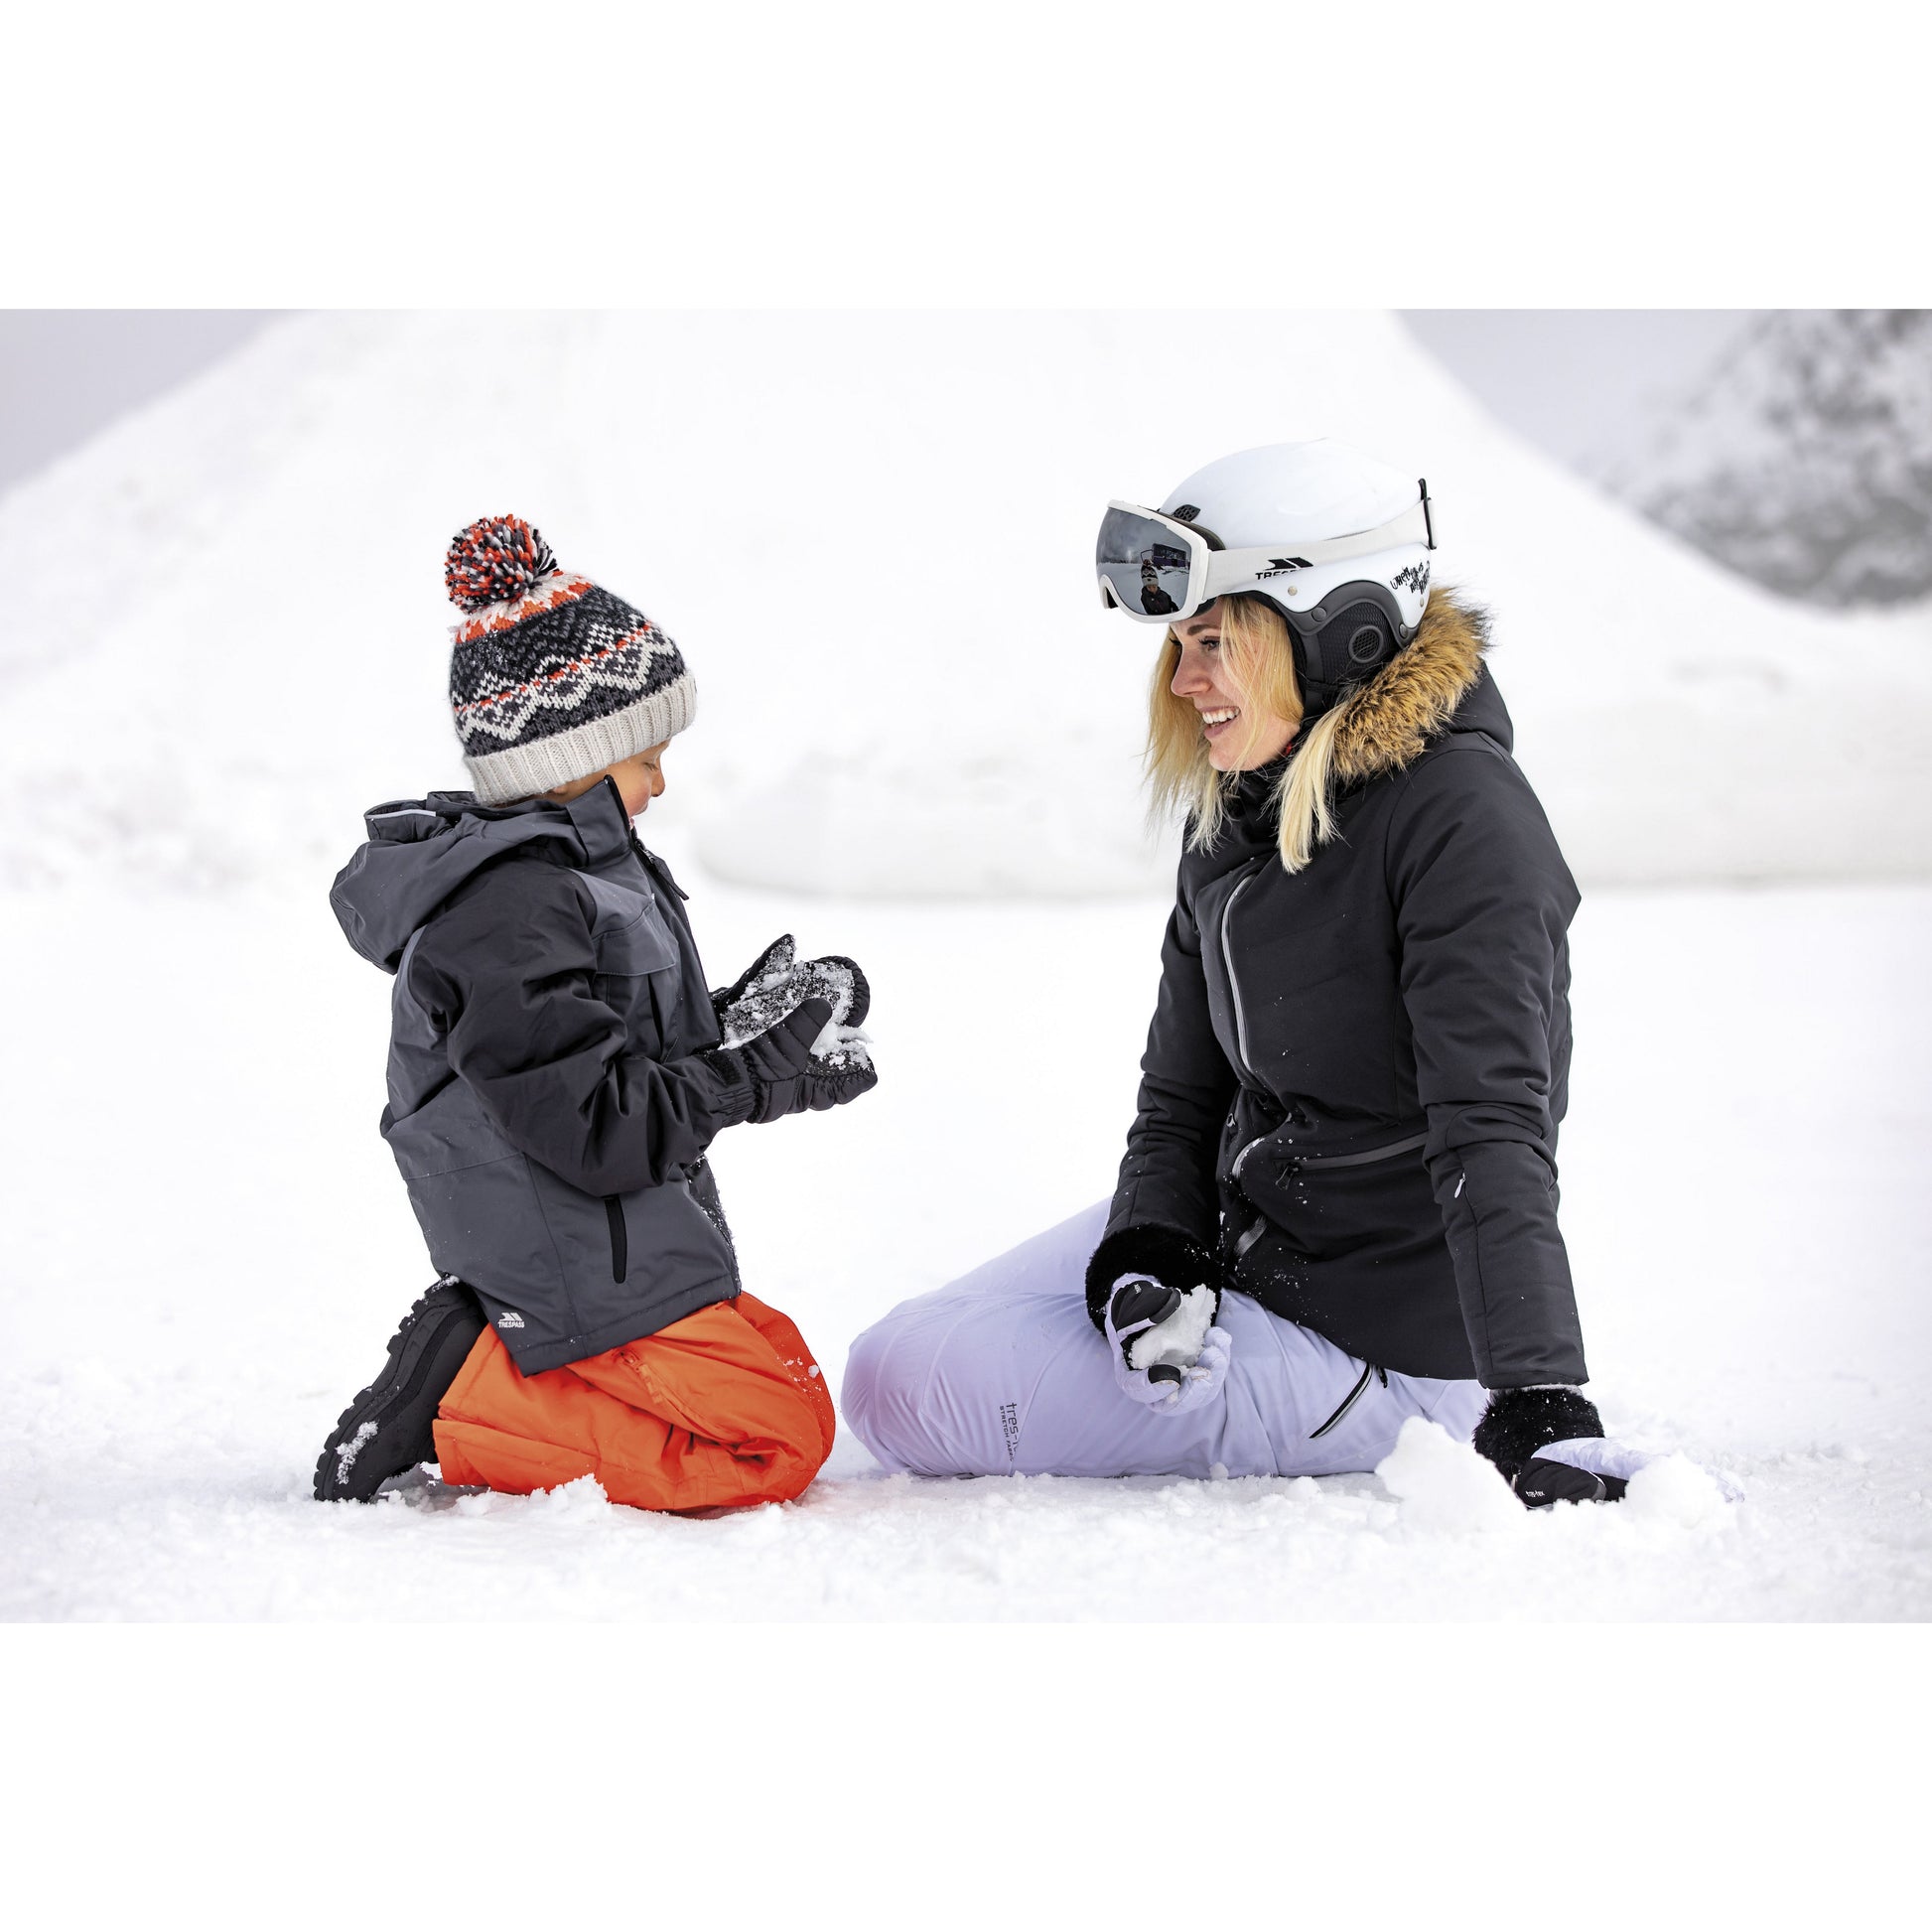 woman and child in ski gear from trespass